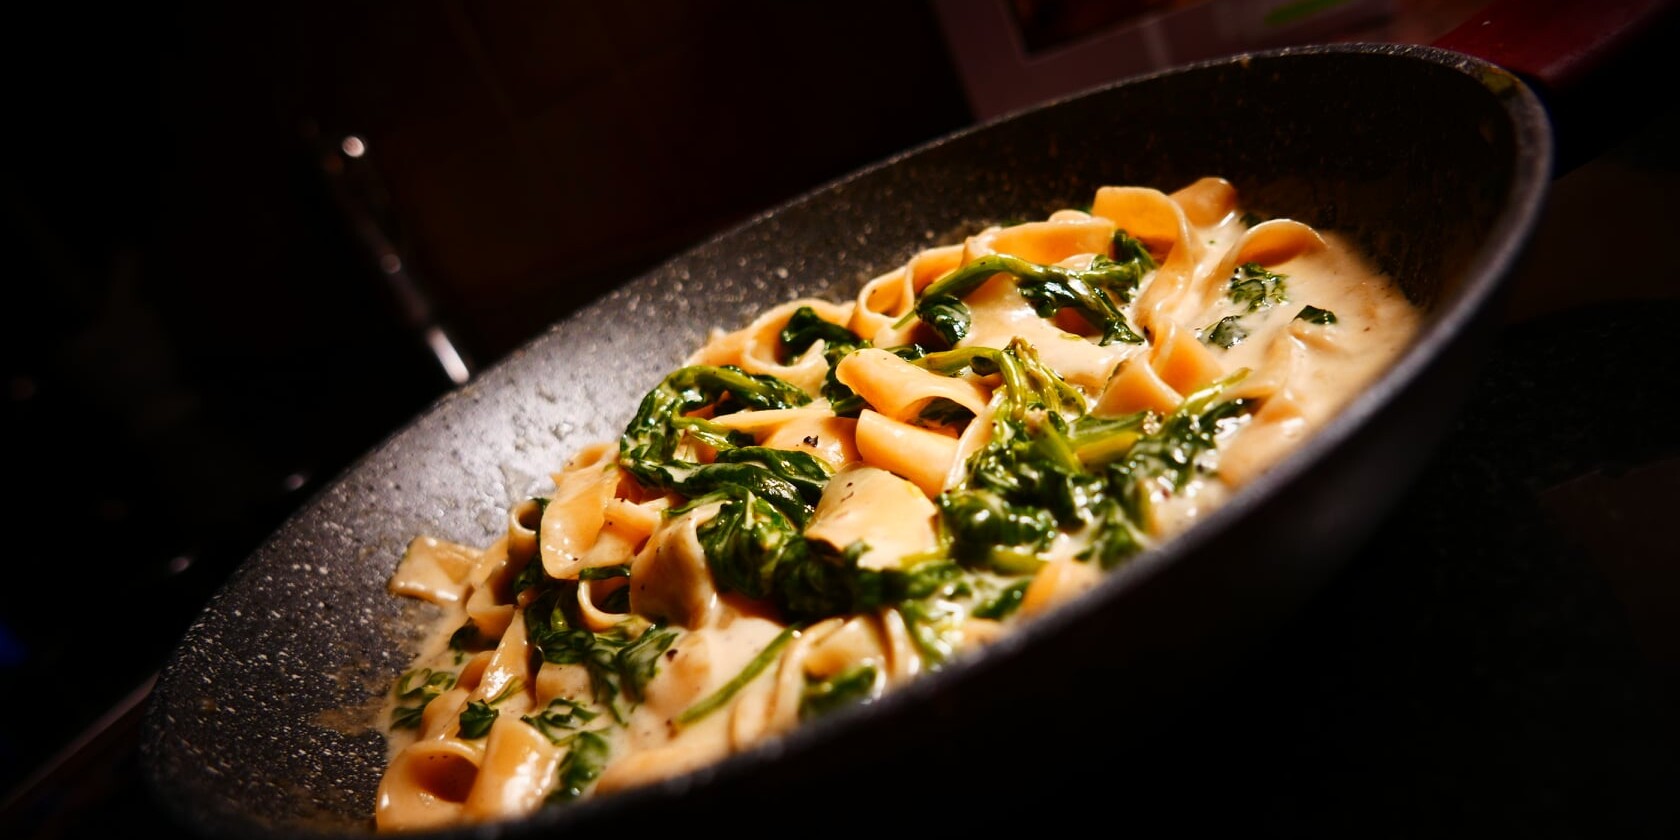 Pappardelle with Spinach in a Grana and Nutmeg Cream Sauce